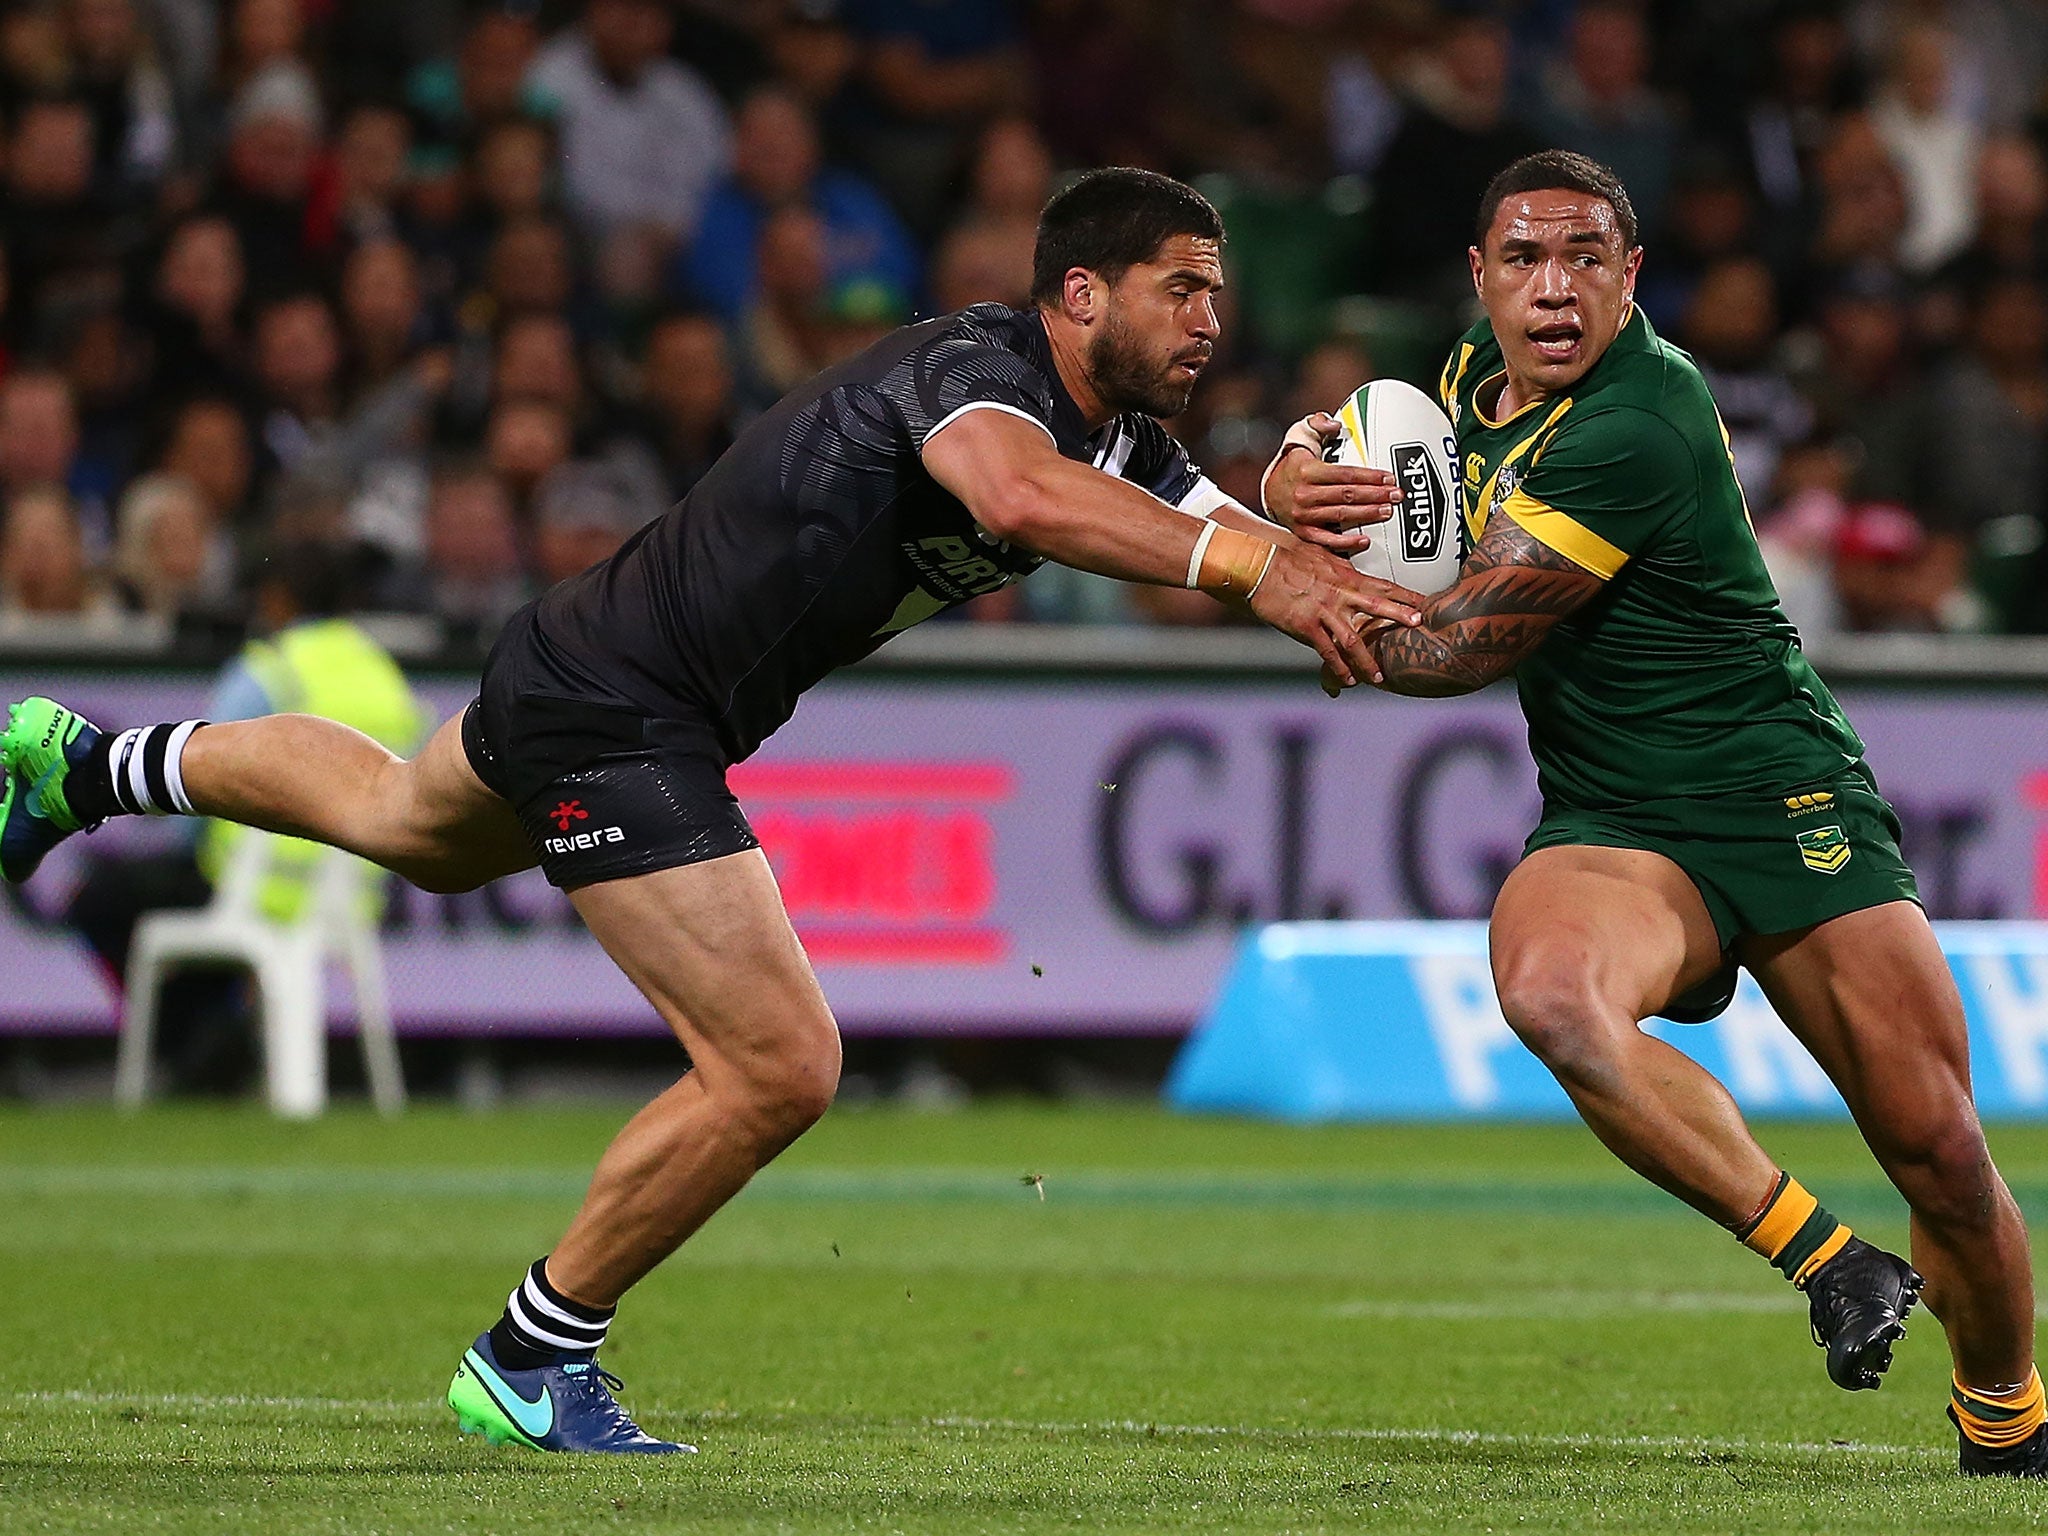 Tyson Frizell looks to avoid being tackled by Jesse Bromwich during the International Rugby League Test match between the Australian Kangaroos and the New Zealand Kiwis on October 15, 2016